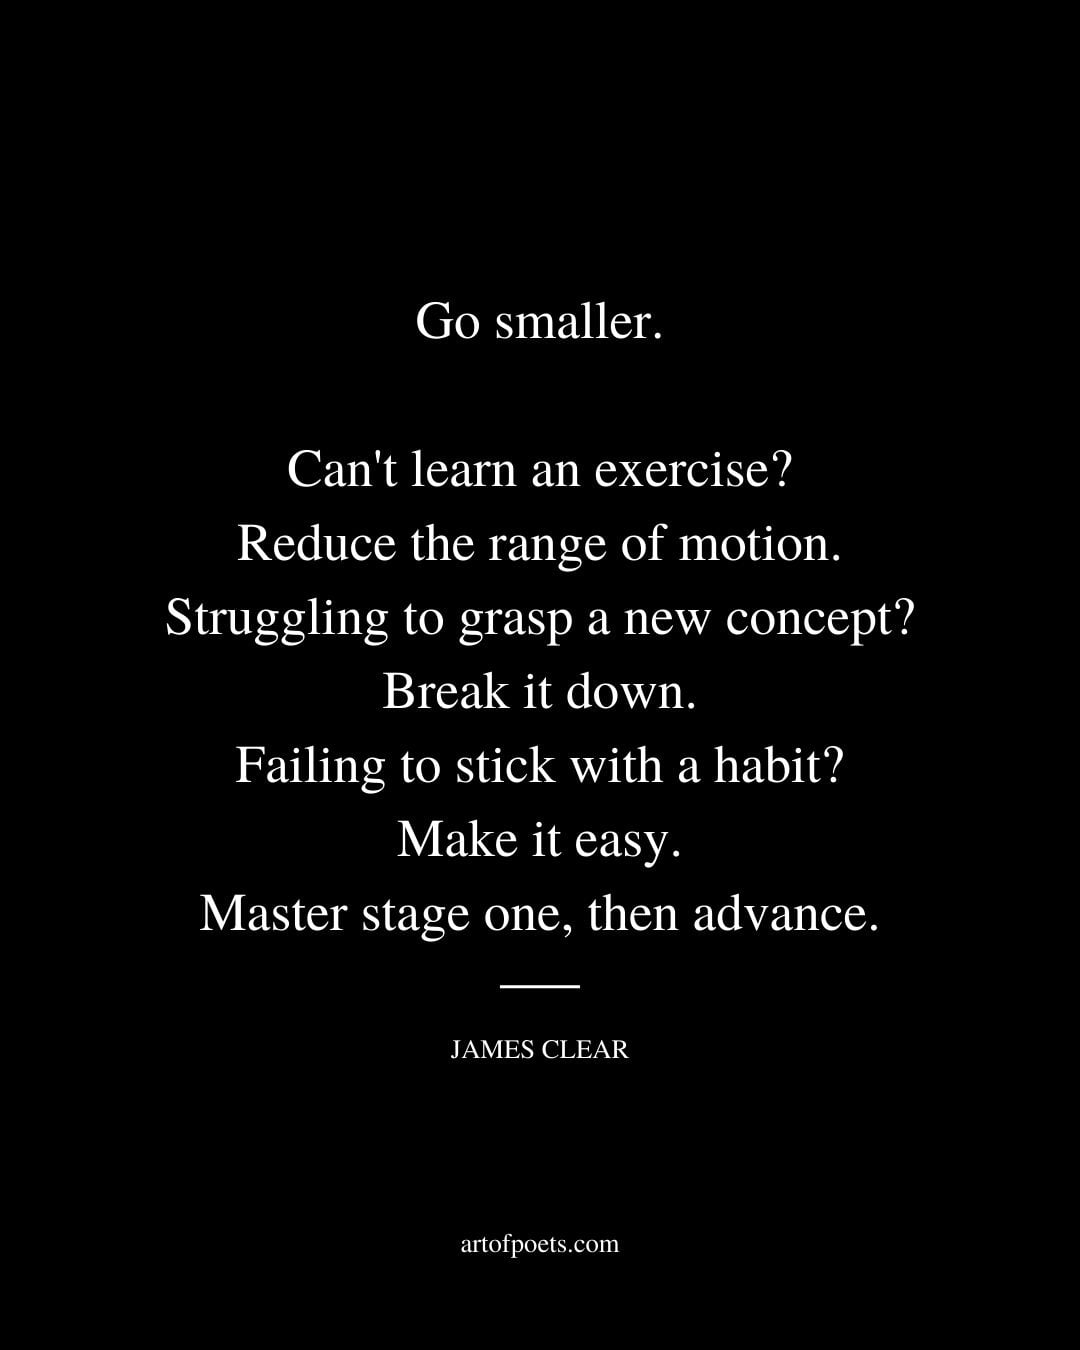 Go smaller. Cant learn an exercise Reduce the range of motion. Struggling to grasp a new concept Break it down. Failing to stick with a habit Make it easy. Master stage one then advance